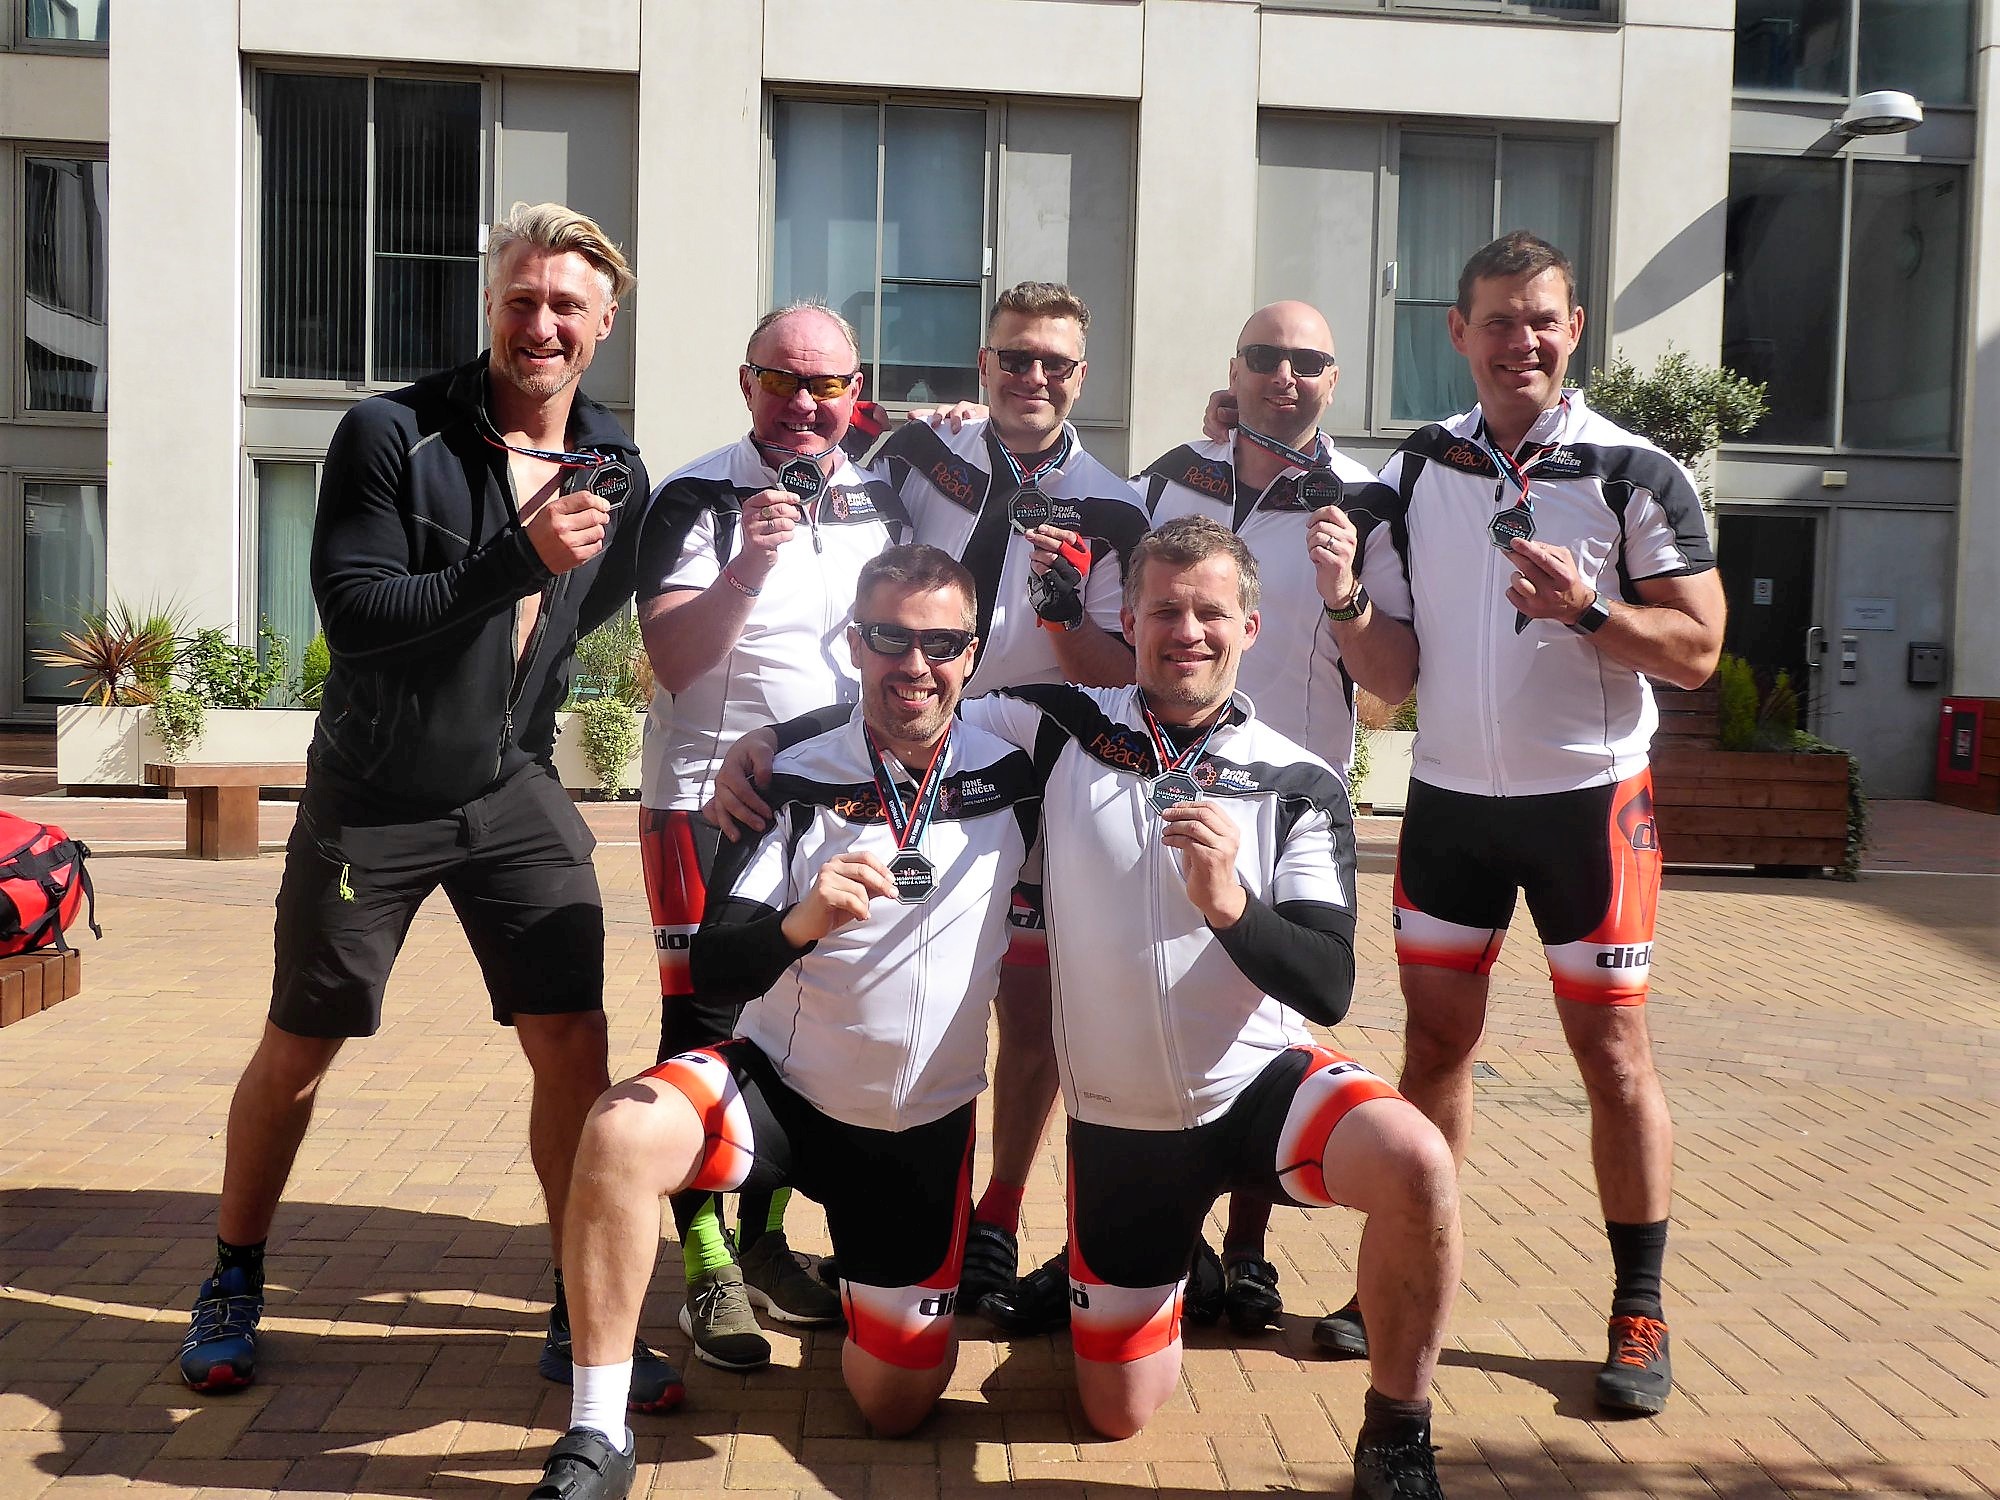 Cycling Enthusiasts Help Raise Over £3,500 for Cancer Charity